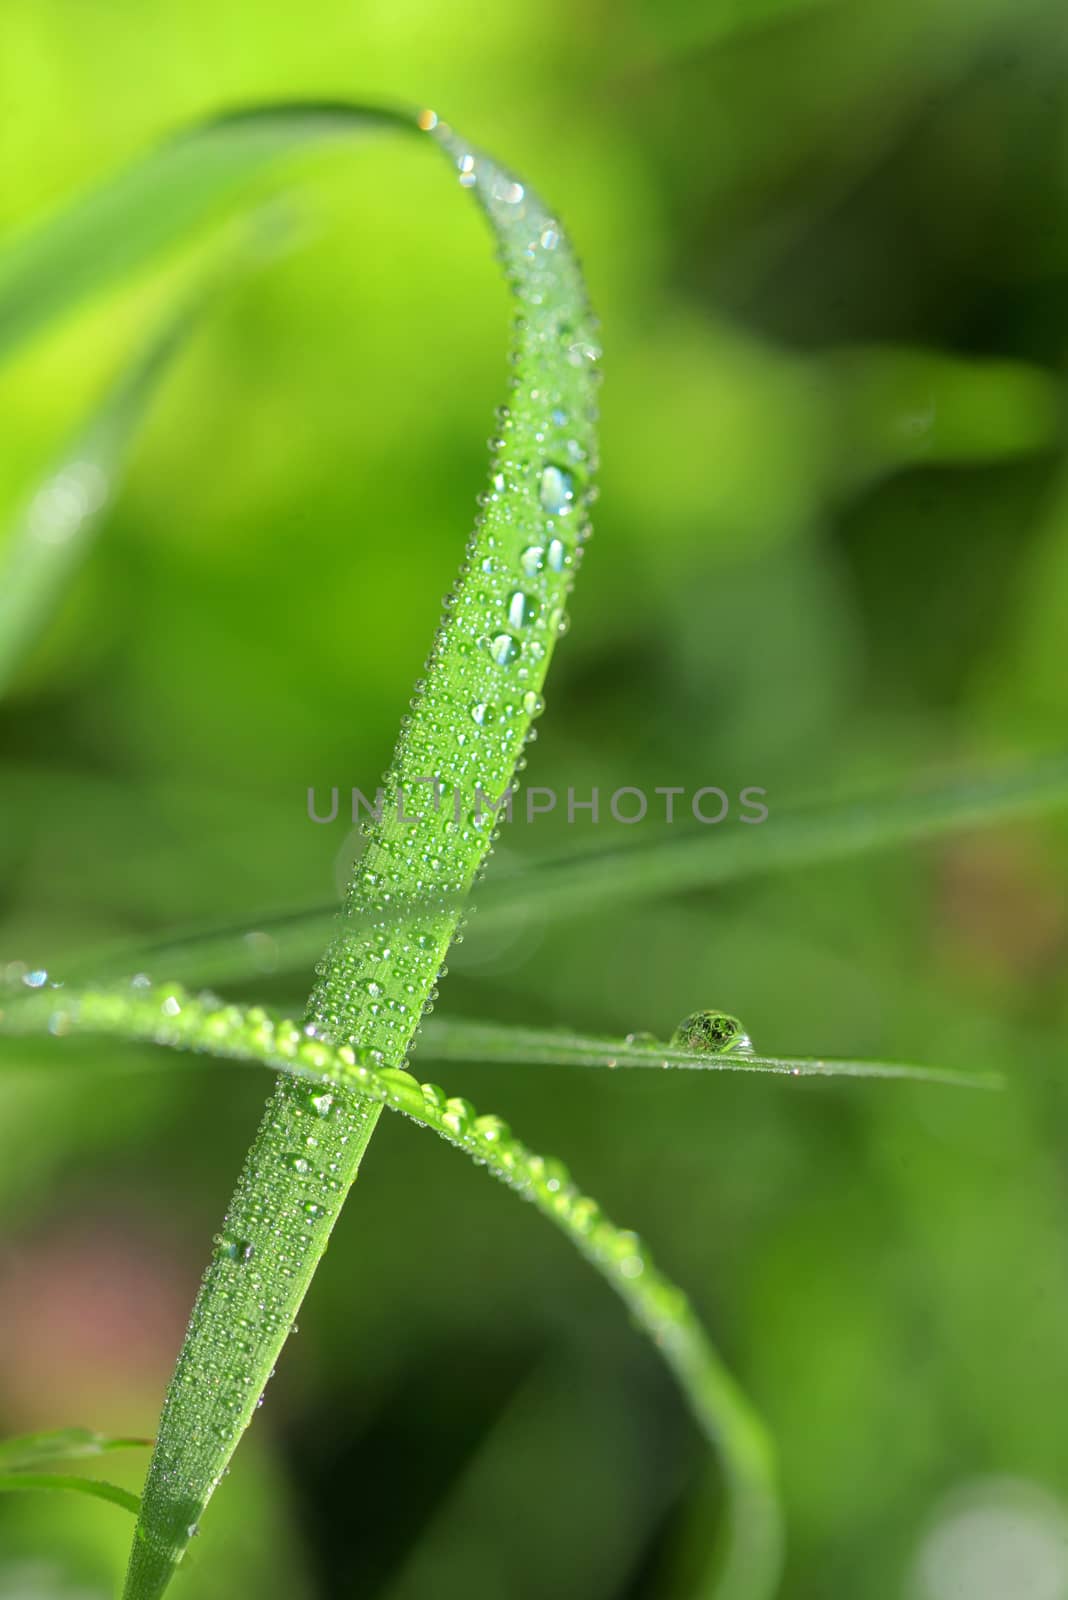 Dew drops close up in summer